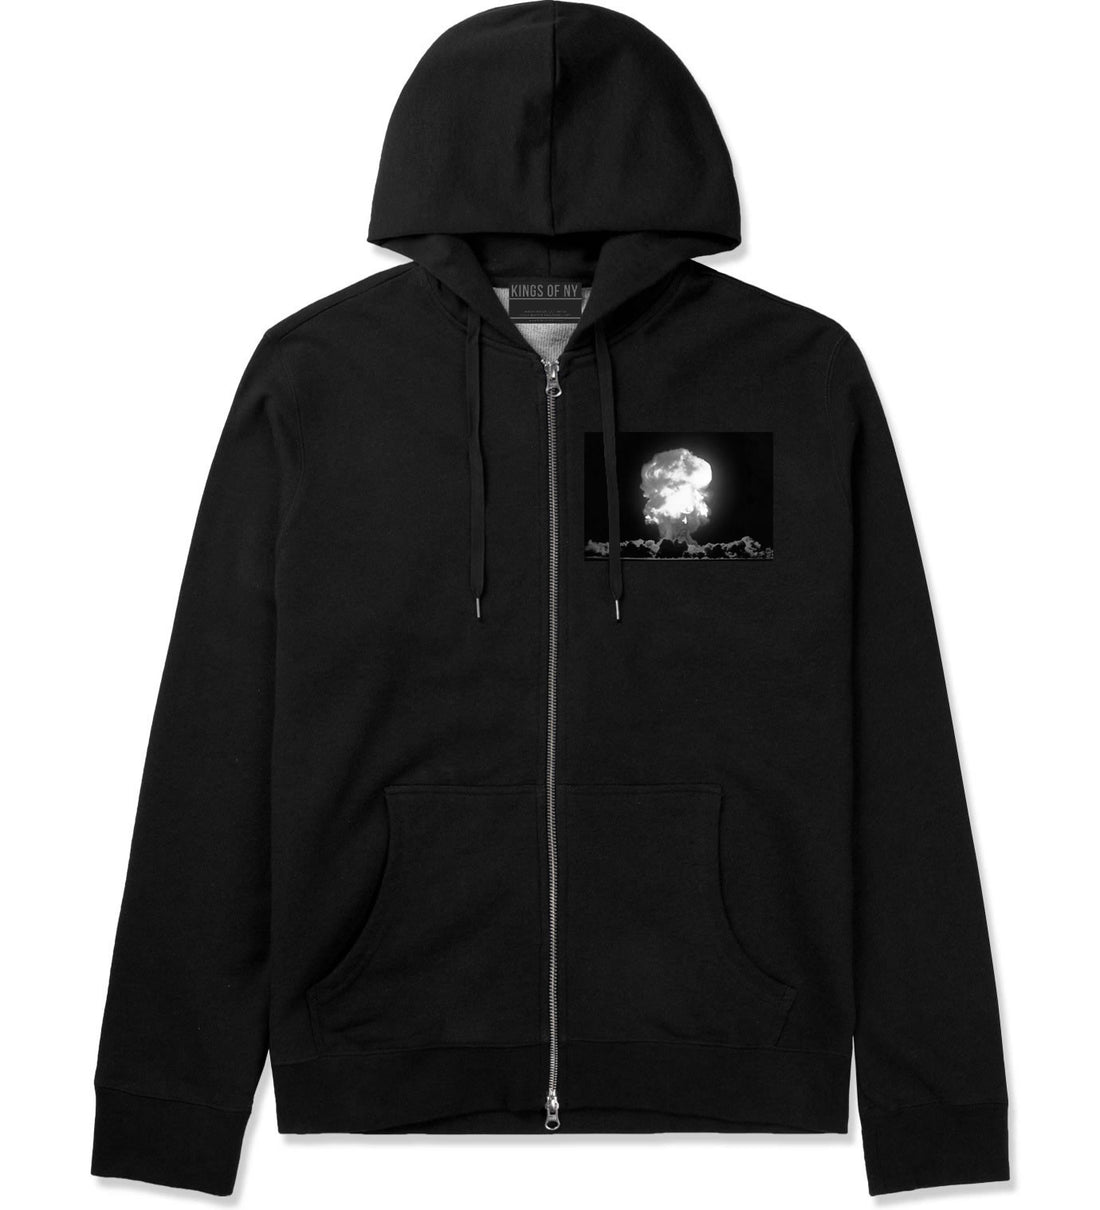 Explosion Nuclear Bomb Cloud Zip Up Hoodie in Black By Kings Of NY